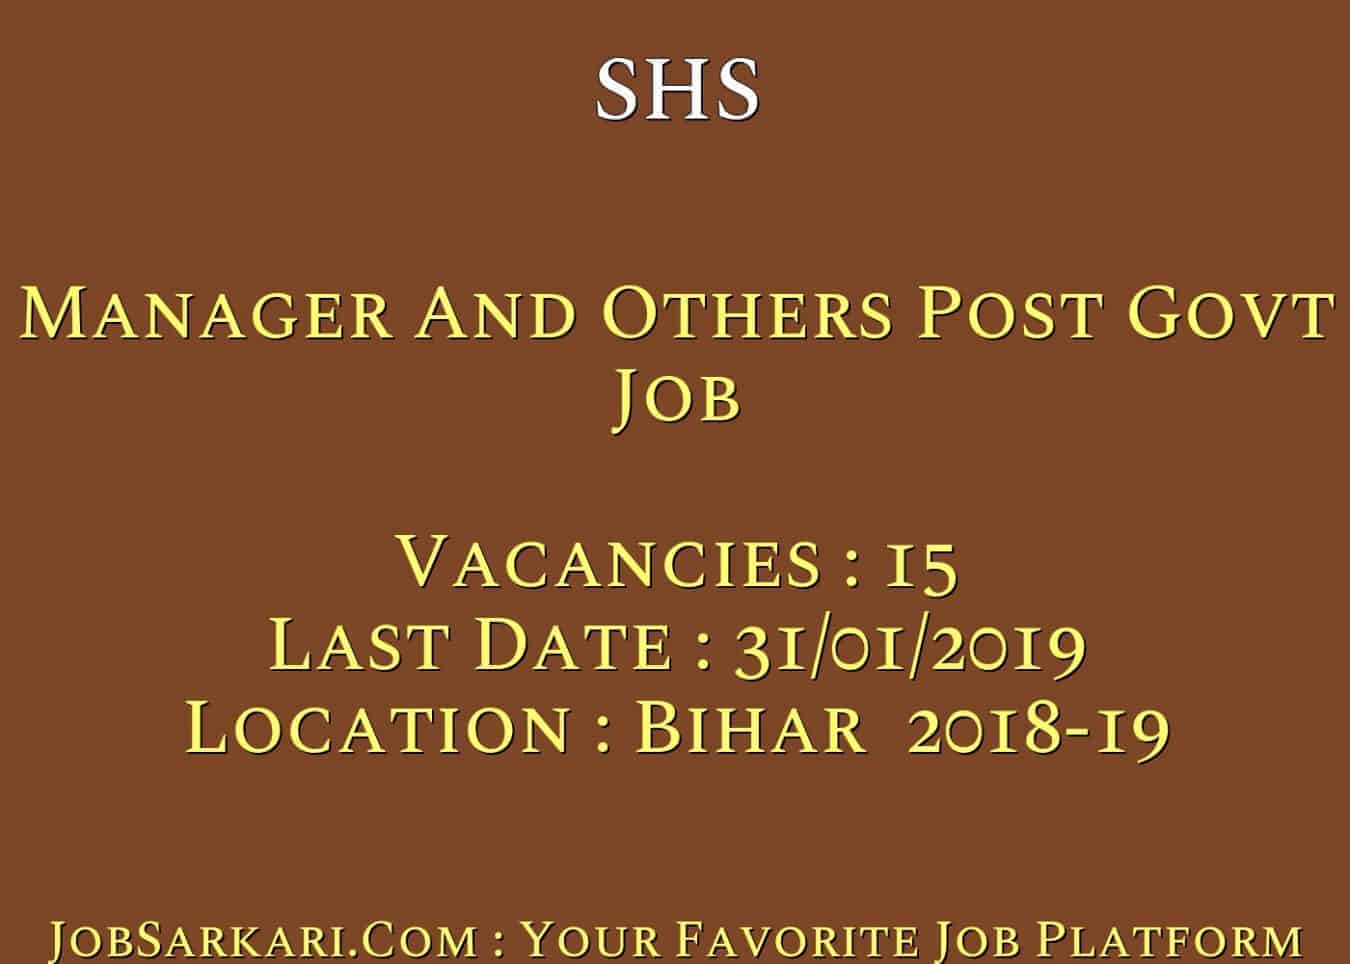 SHS Recruitment 2019 For Manager And Others Post Govt Job